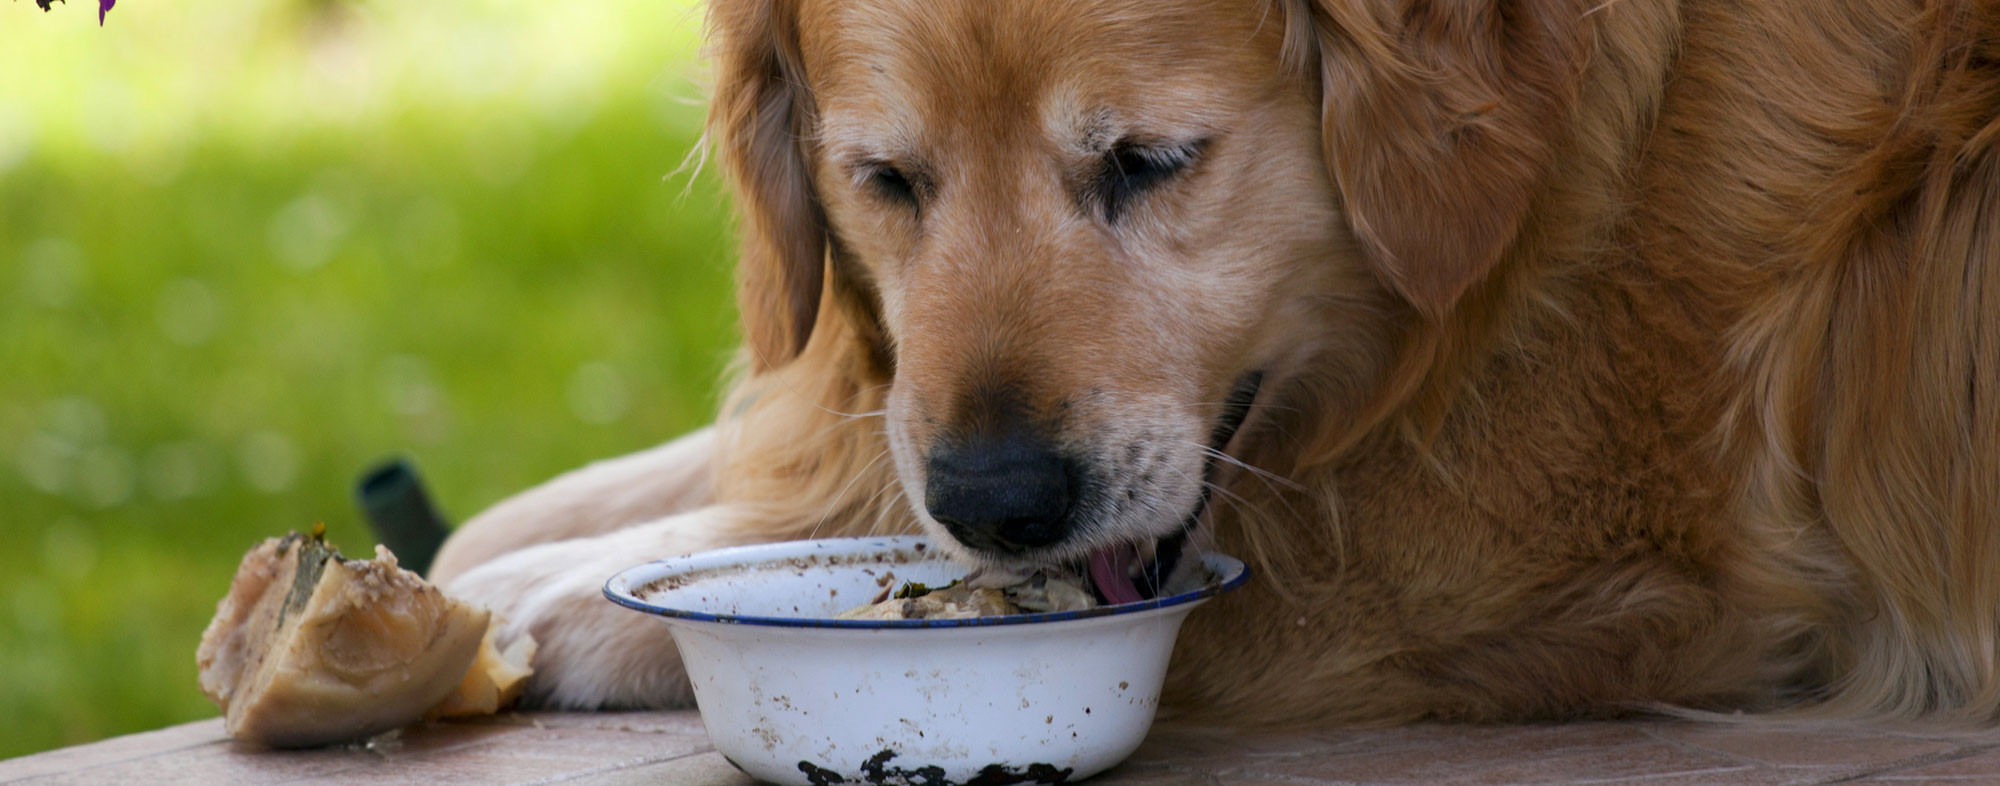 It's usually unsafe to feed your dog human foods, with exceptions